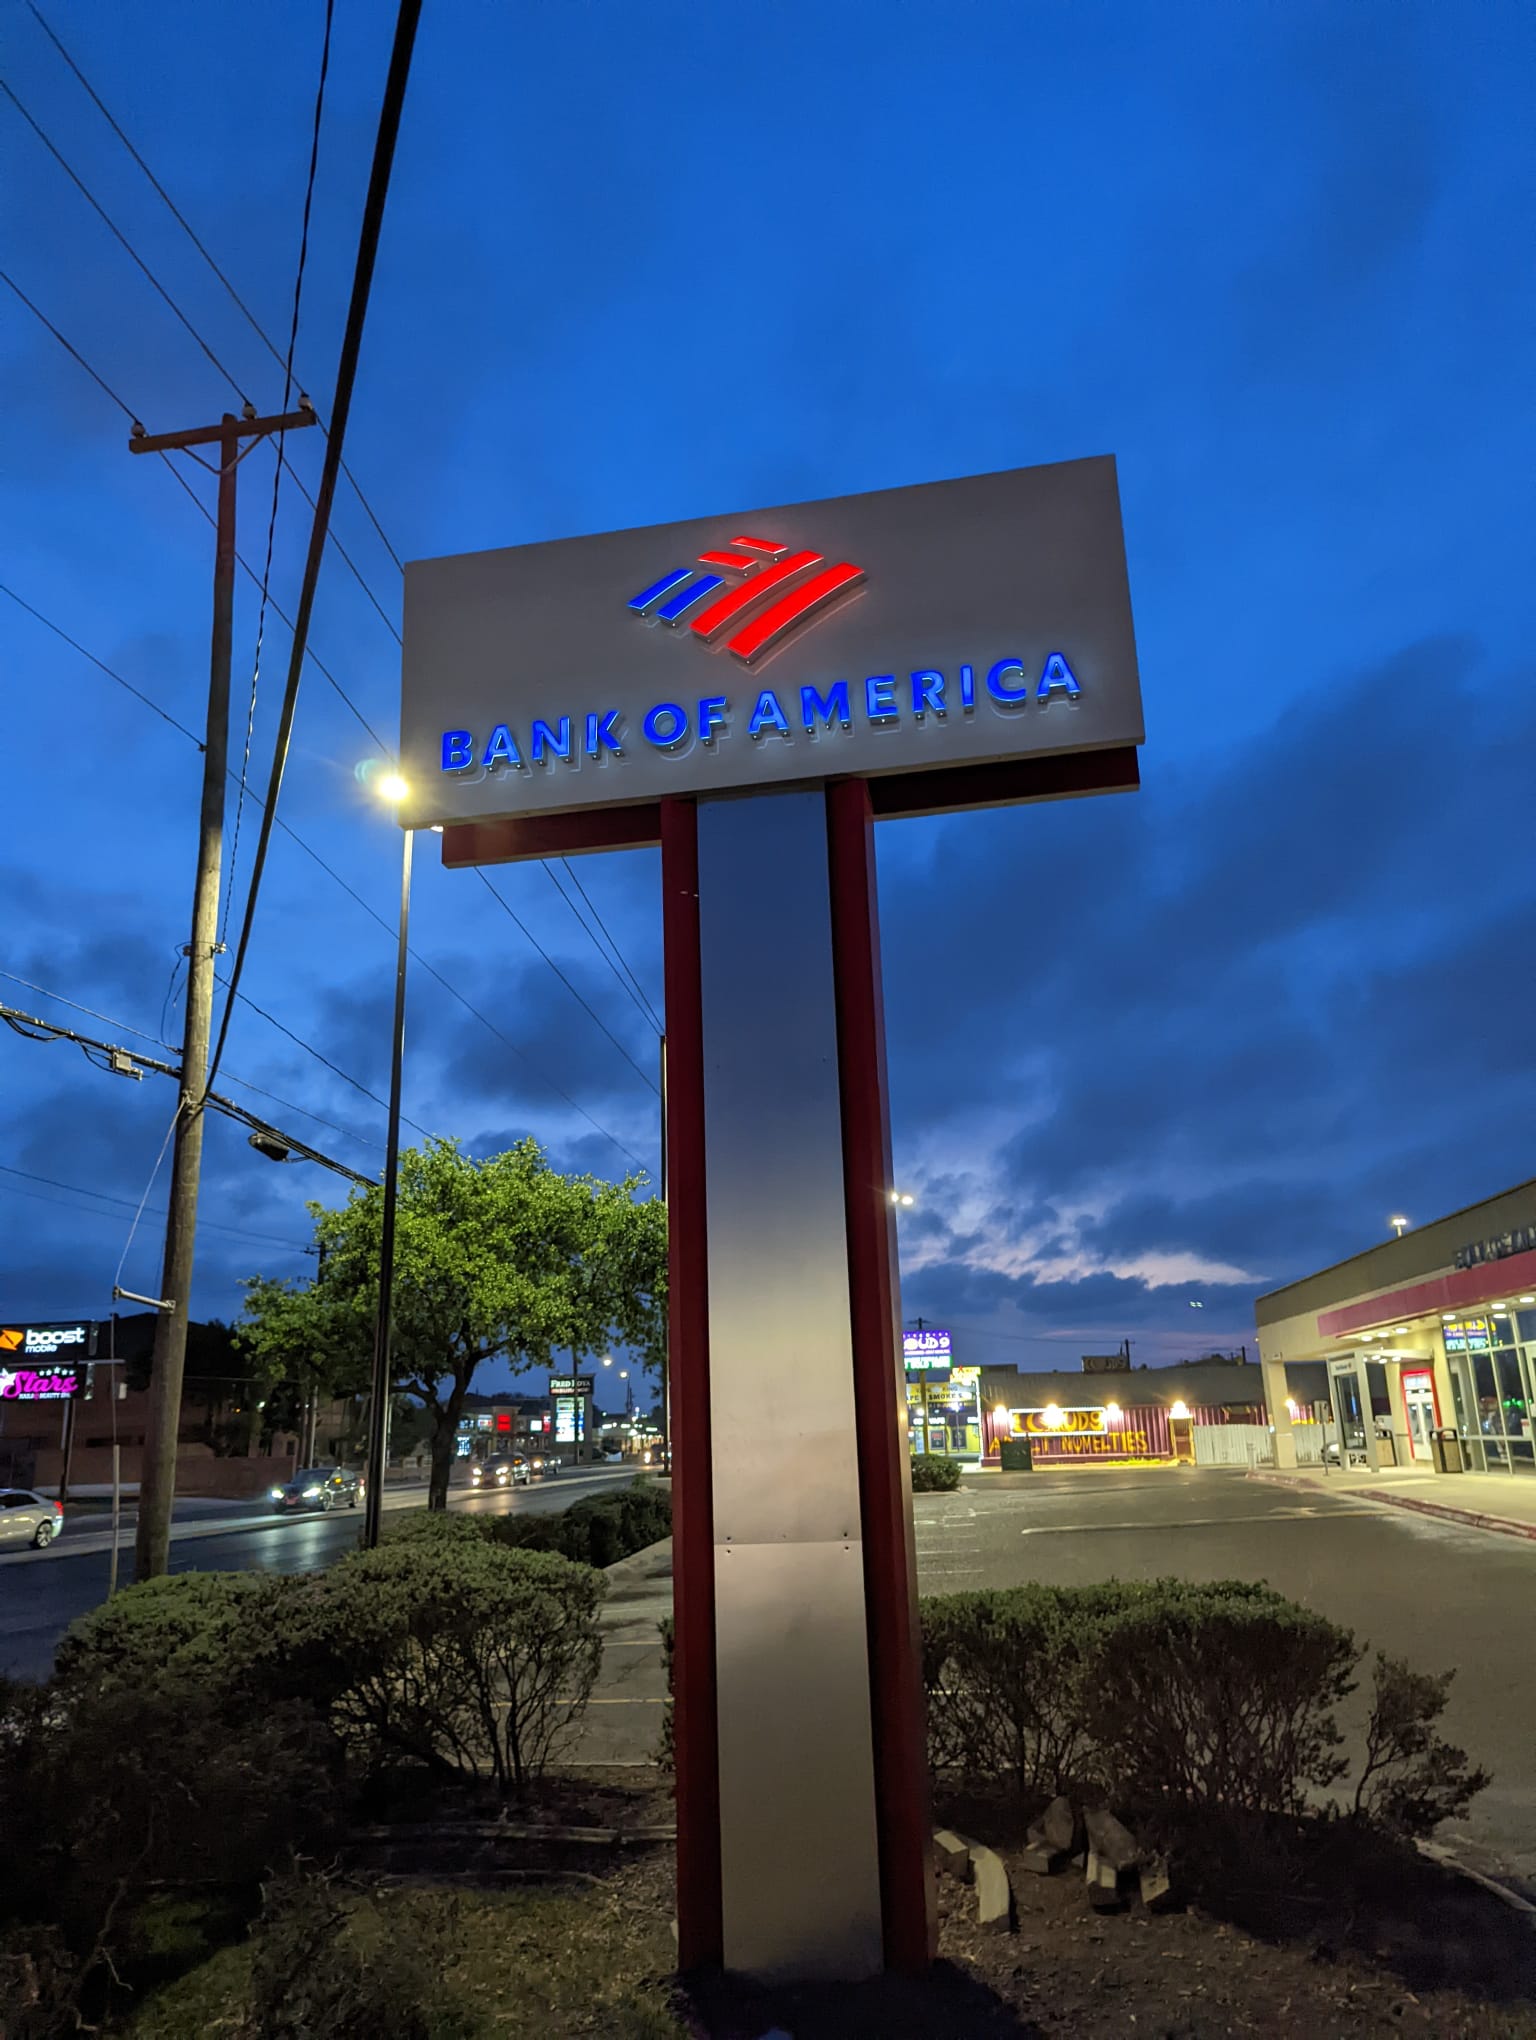 Crafted a luminous pylon sign for Bank of America, ensuring brand prominence with sophisticated nighttime visibility.